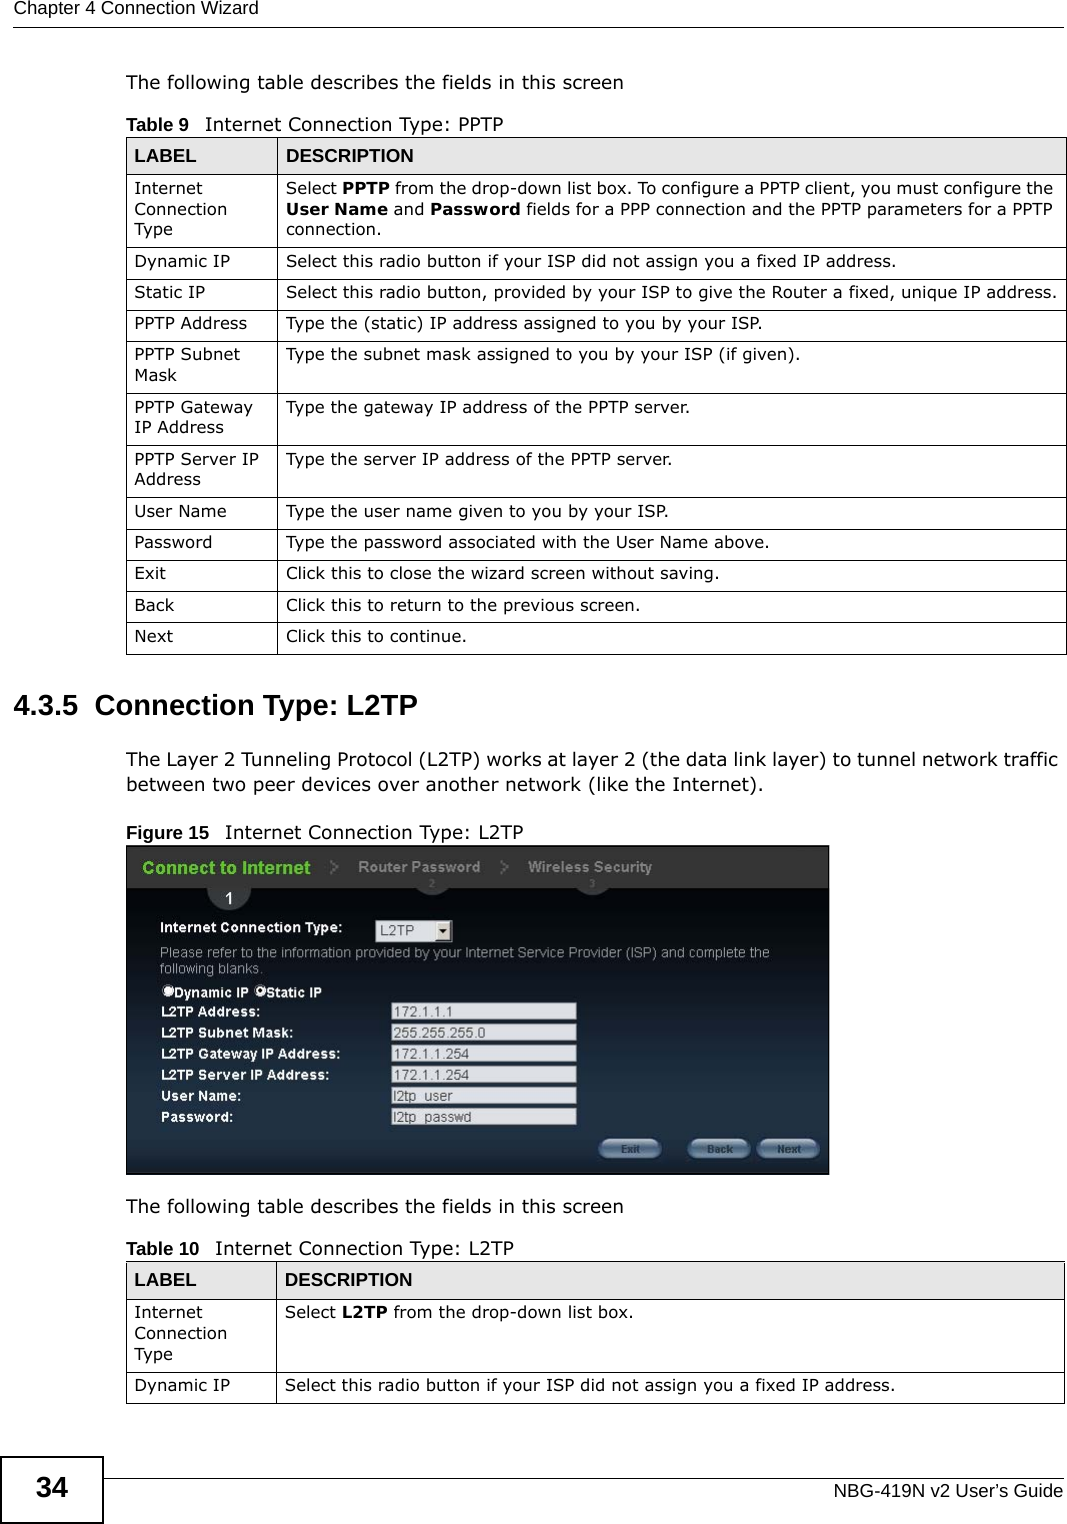 Chapter 4 Connection WizardNBG-419N v2 User’s Guide34The following table describes the fields in this screen4.3.5  Connection Type: L2TPThe Layer 2 Tunneling Protocol (L2TP) works at layer 2 (the data link layer) to tunnel network traffic between two peer devices over another network (like the Internet).Figure 15   Internet Connection Type: L2TP The following table describes the fields in this screenTable 9   Internet Connection Type: PPTPLABEL DESCRIPTIONInternet Connection TypeSelect PPTP from the drop-down list box. To configure a PPTP client, you must configure the User Name and Password fields for a PPP connection and the PPTP parameters for a PPTP connection.Dynamic IP Select this radio button if your ISP did not assign you a fixed IP address.Static IP Select this radio button, provided by your ISP to give the Router a fixed, unique IP address.PPTP Address Type the (static) IP address assigned to you by your ISP.PPTP Subnet MaskType the subnet mask assigned to you by your ISP (if given).PPTP Gateway IP AddressType the gateway IP address of the PPTP server.PPTP Server IP AddressType the server IP address of the PPTP server.User Name Type the user name given to you by your ISP. Password Type the password associated with the User Name above.Exit Click this to close the wizard screen without saving.Back Click this to return to the previous screen.Next Click this to continue. Table 10   Internet Connection Type: L2TPLABEL DESCRIPTIONInternet Connection TypeSelect L2TP from the drop-down list box. Dynamic IP Select this radio button if your ISP did not assign you a fixed IP address.